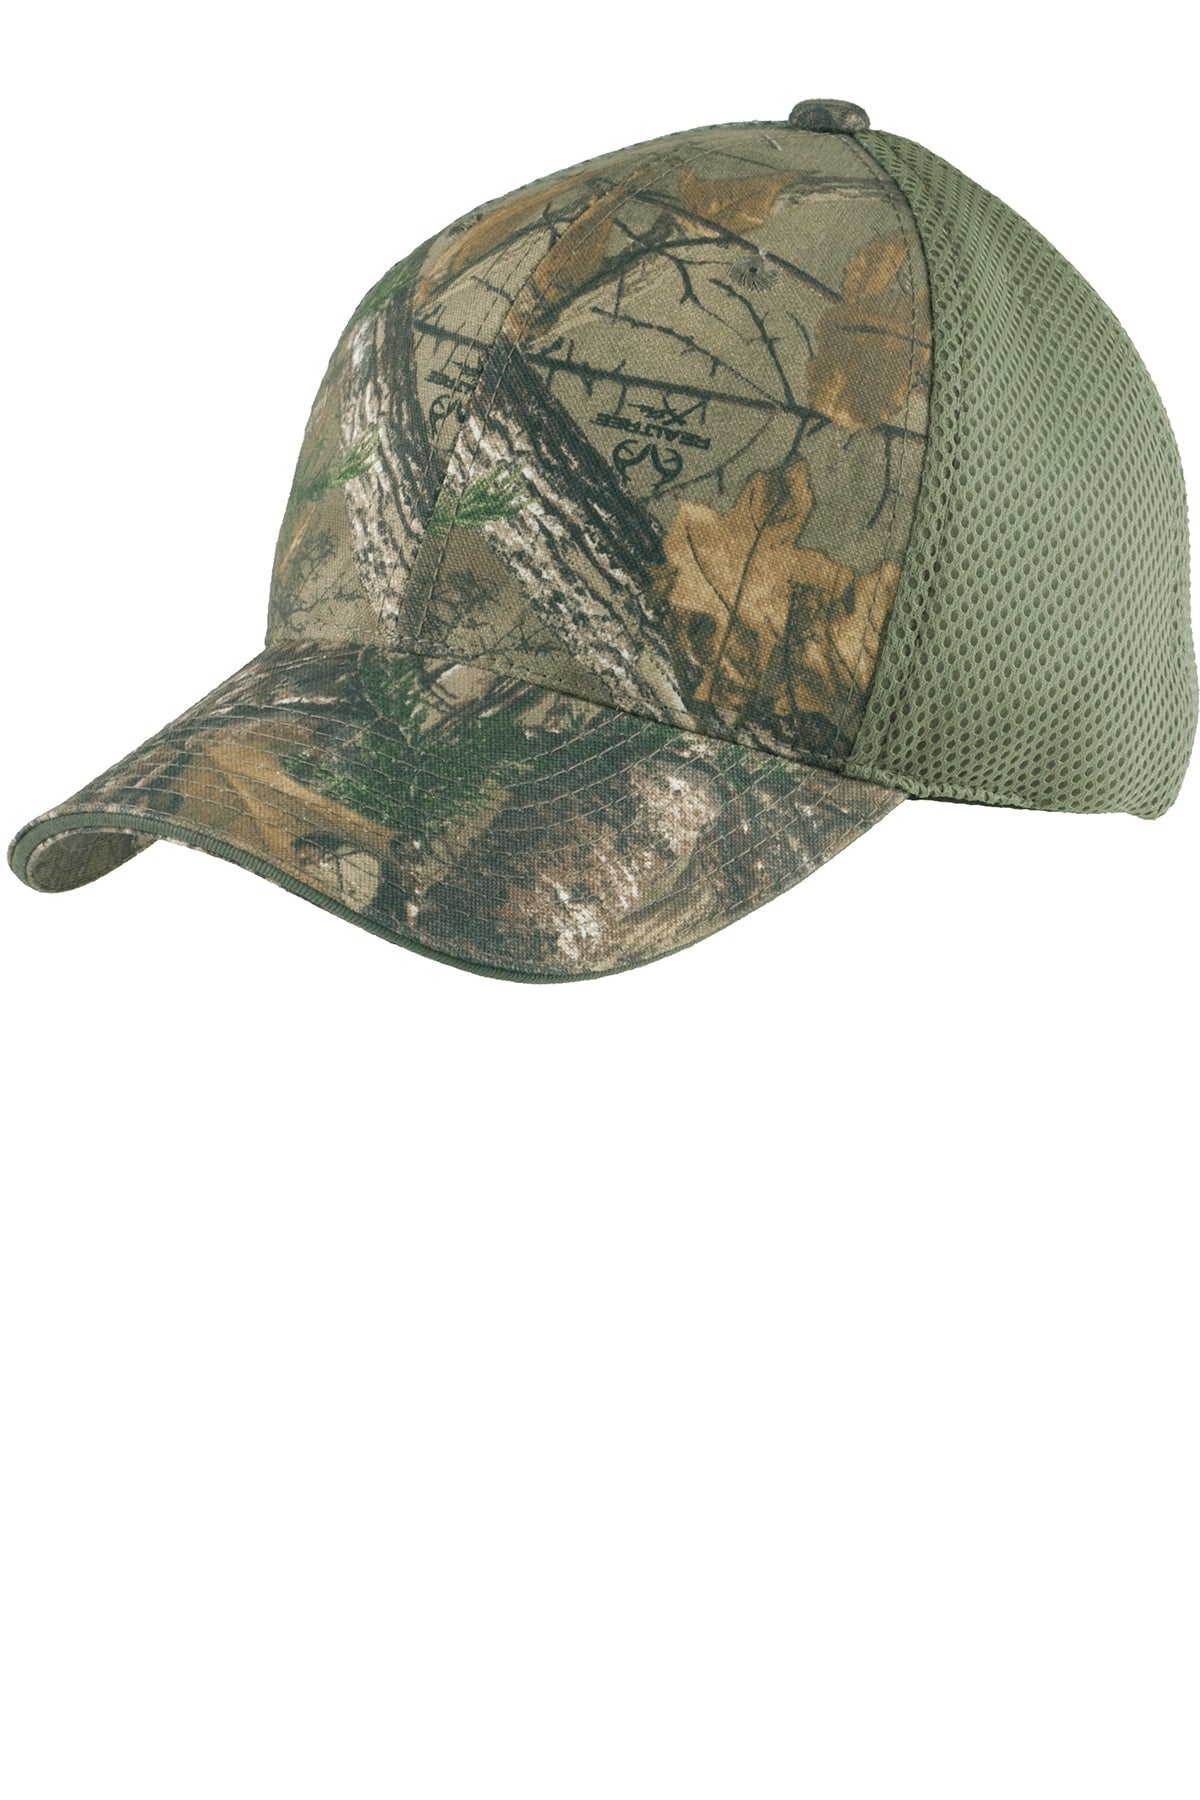 Port Authority Camouflage Custom Caps with Air Mesh Back, Realtree Xtra/ Green Mesh